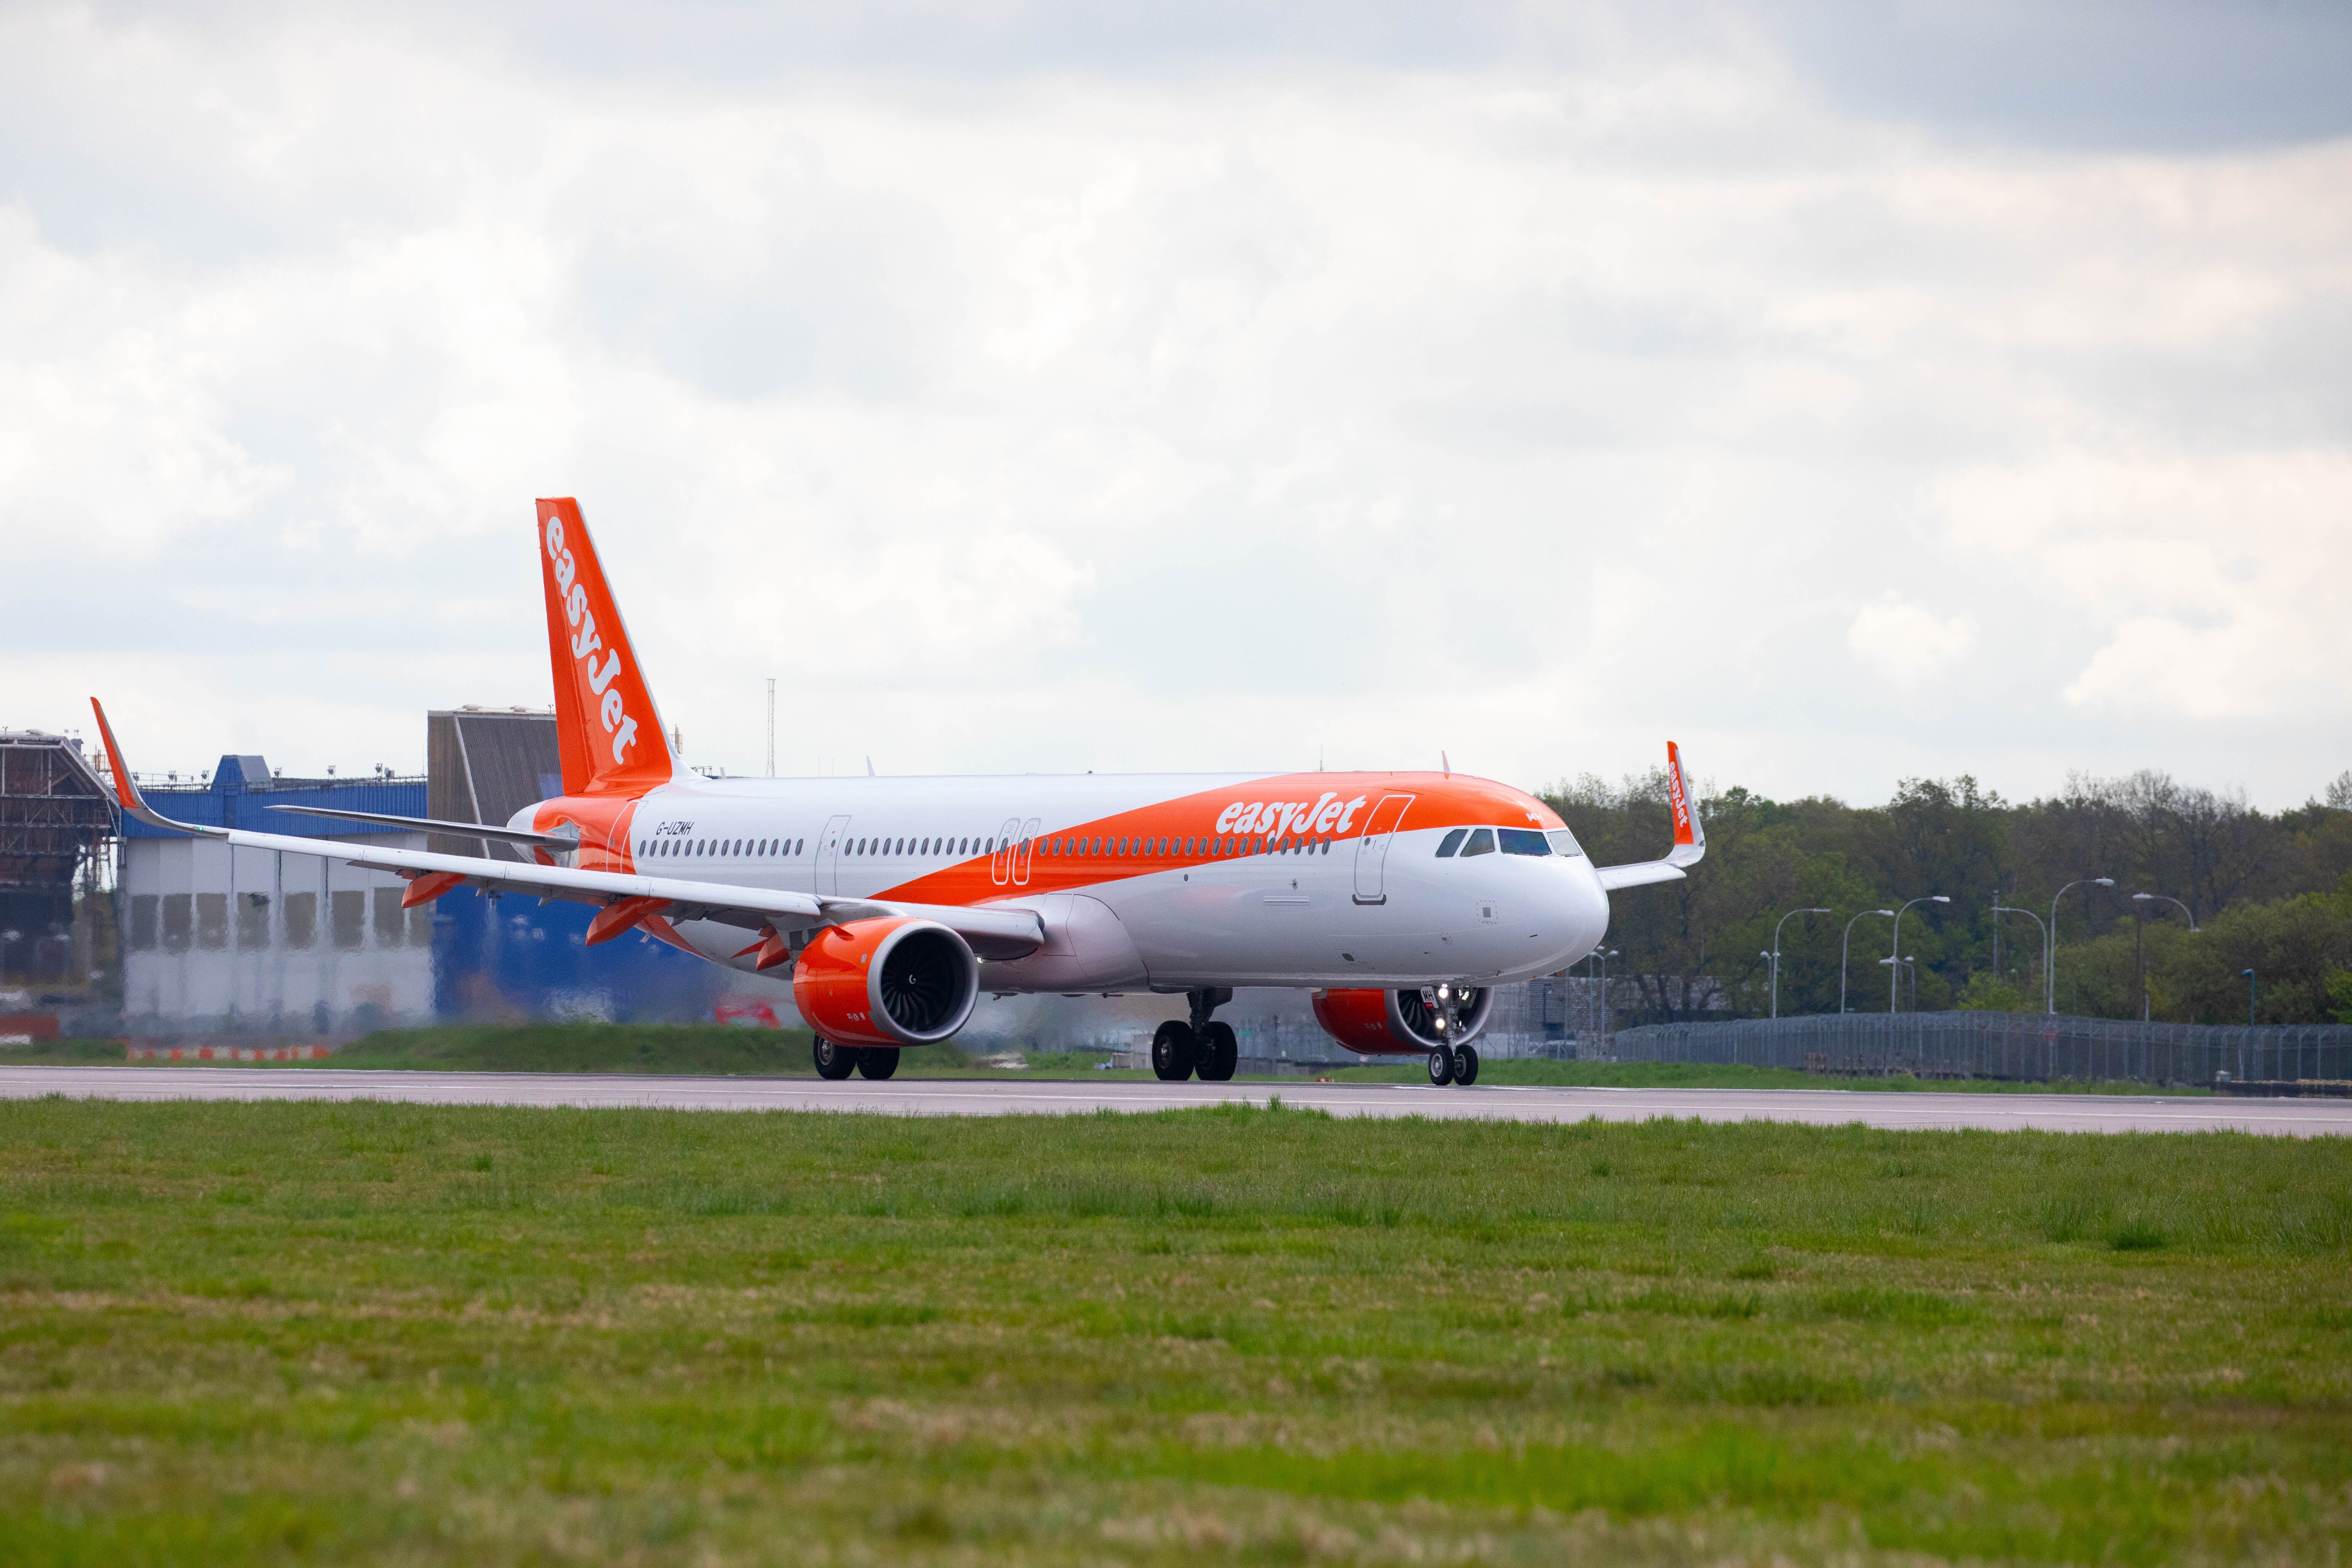 The easyJet plane had to make an unscheduled landing in Munich due to two passengers “behaving disruptively”